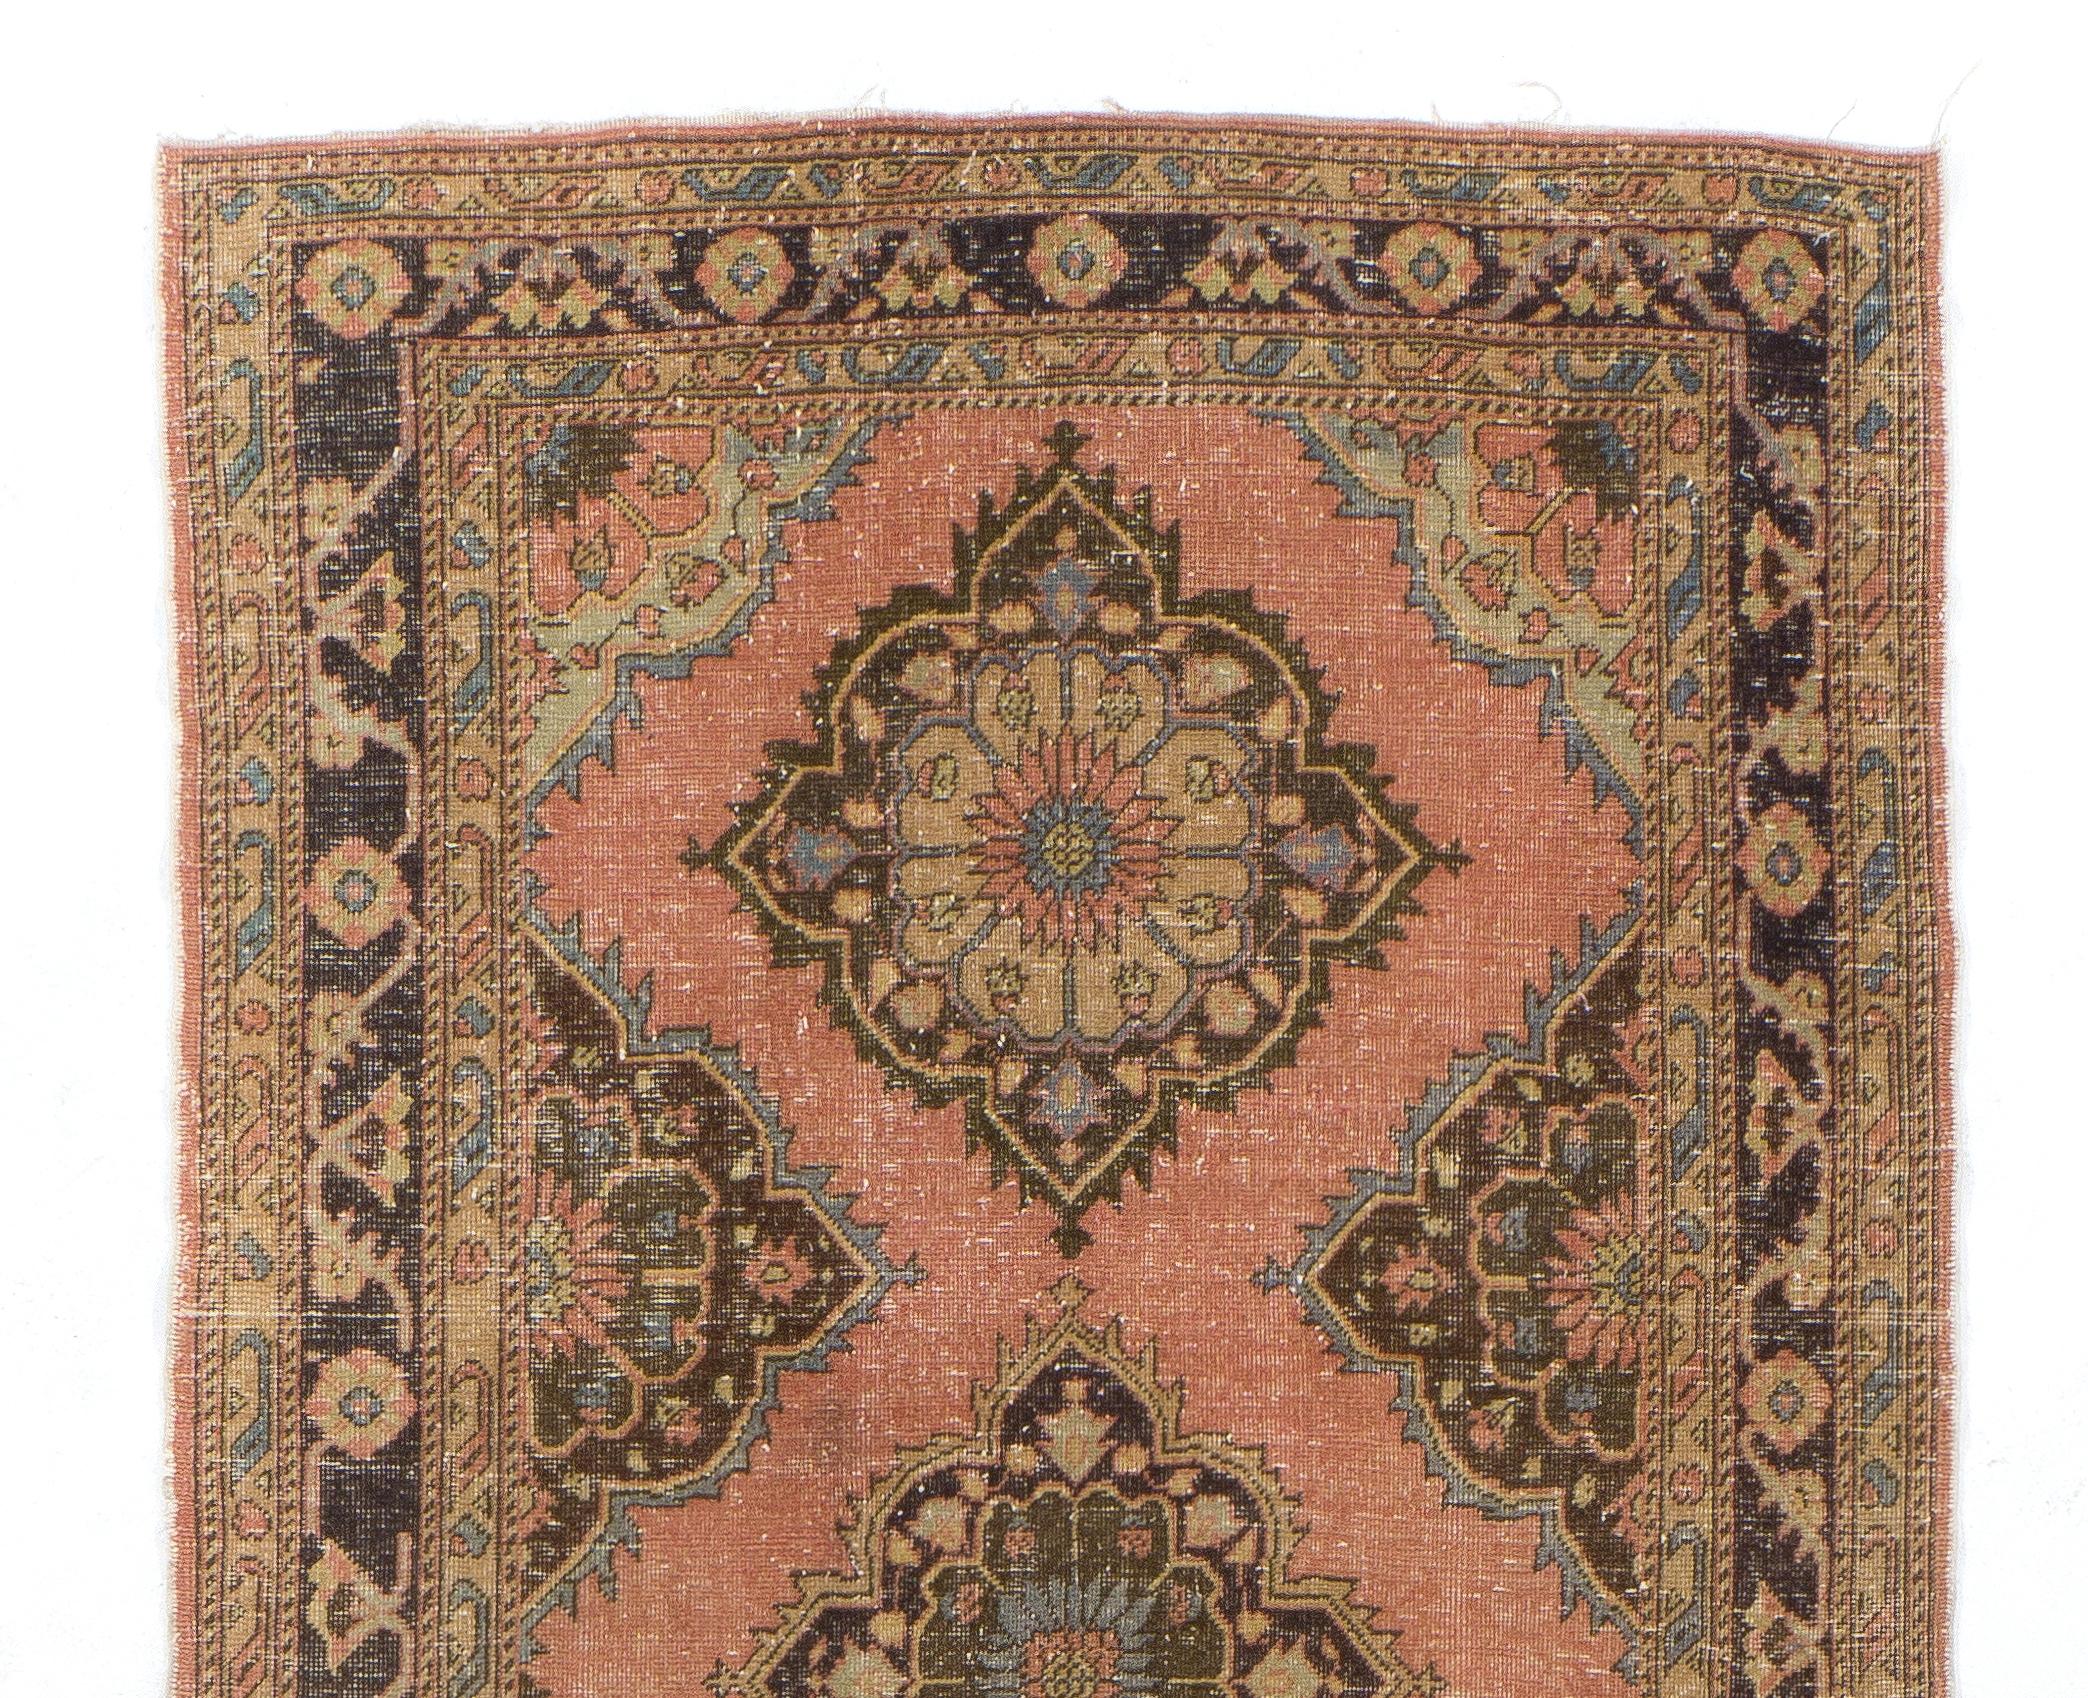 A vintage Turkish runner rug featuring a multiple medallion design.
The rug was hand-knotted in the 1960s and has low wool pile on cotton foundation. It is in very good condition, professionally-washed, sturdy and suitable for areas with high foot